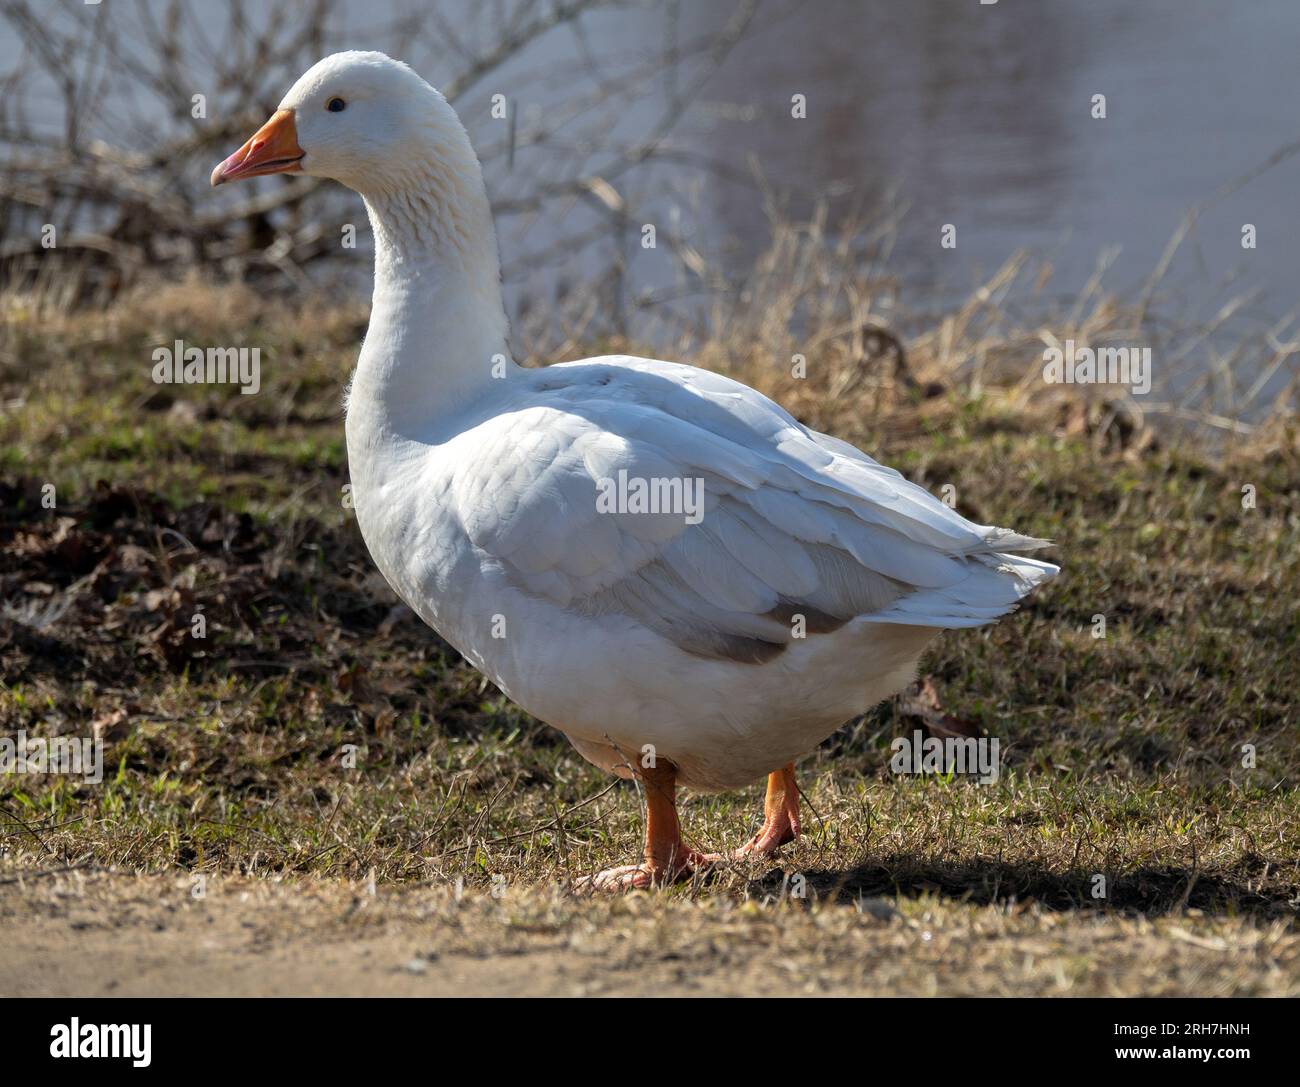 White domestic goose on the lawn by the pond on a summer day. Goose pasture (grass plucked), geese farming Stock Photo